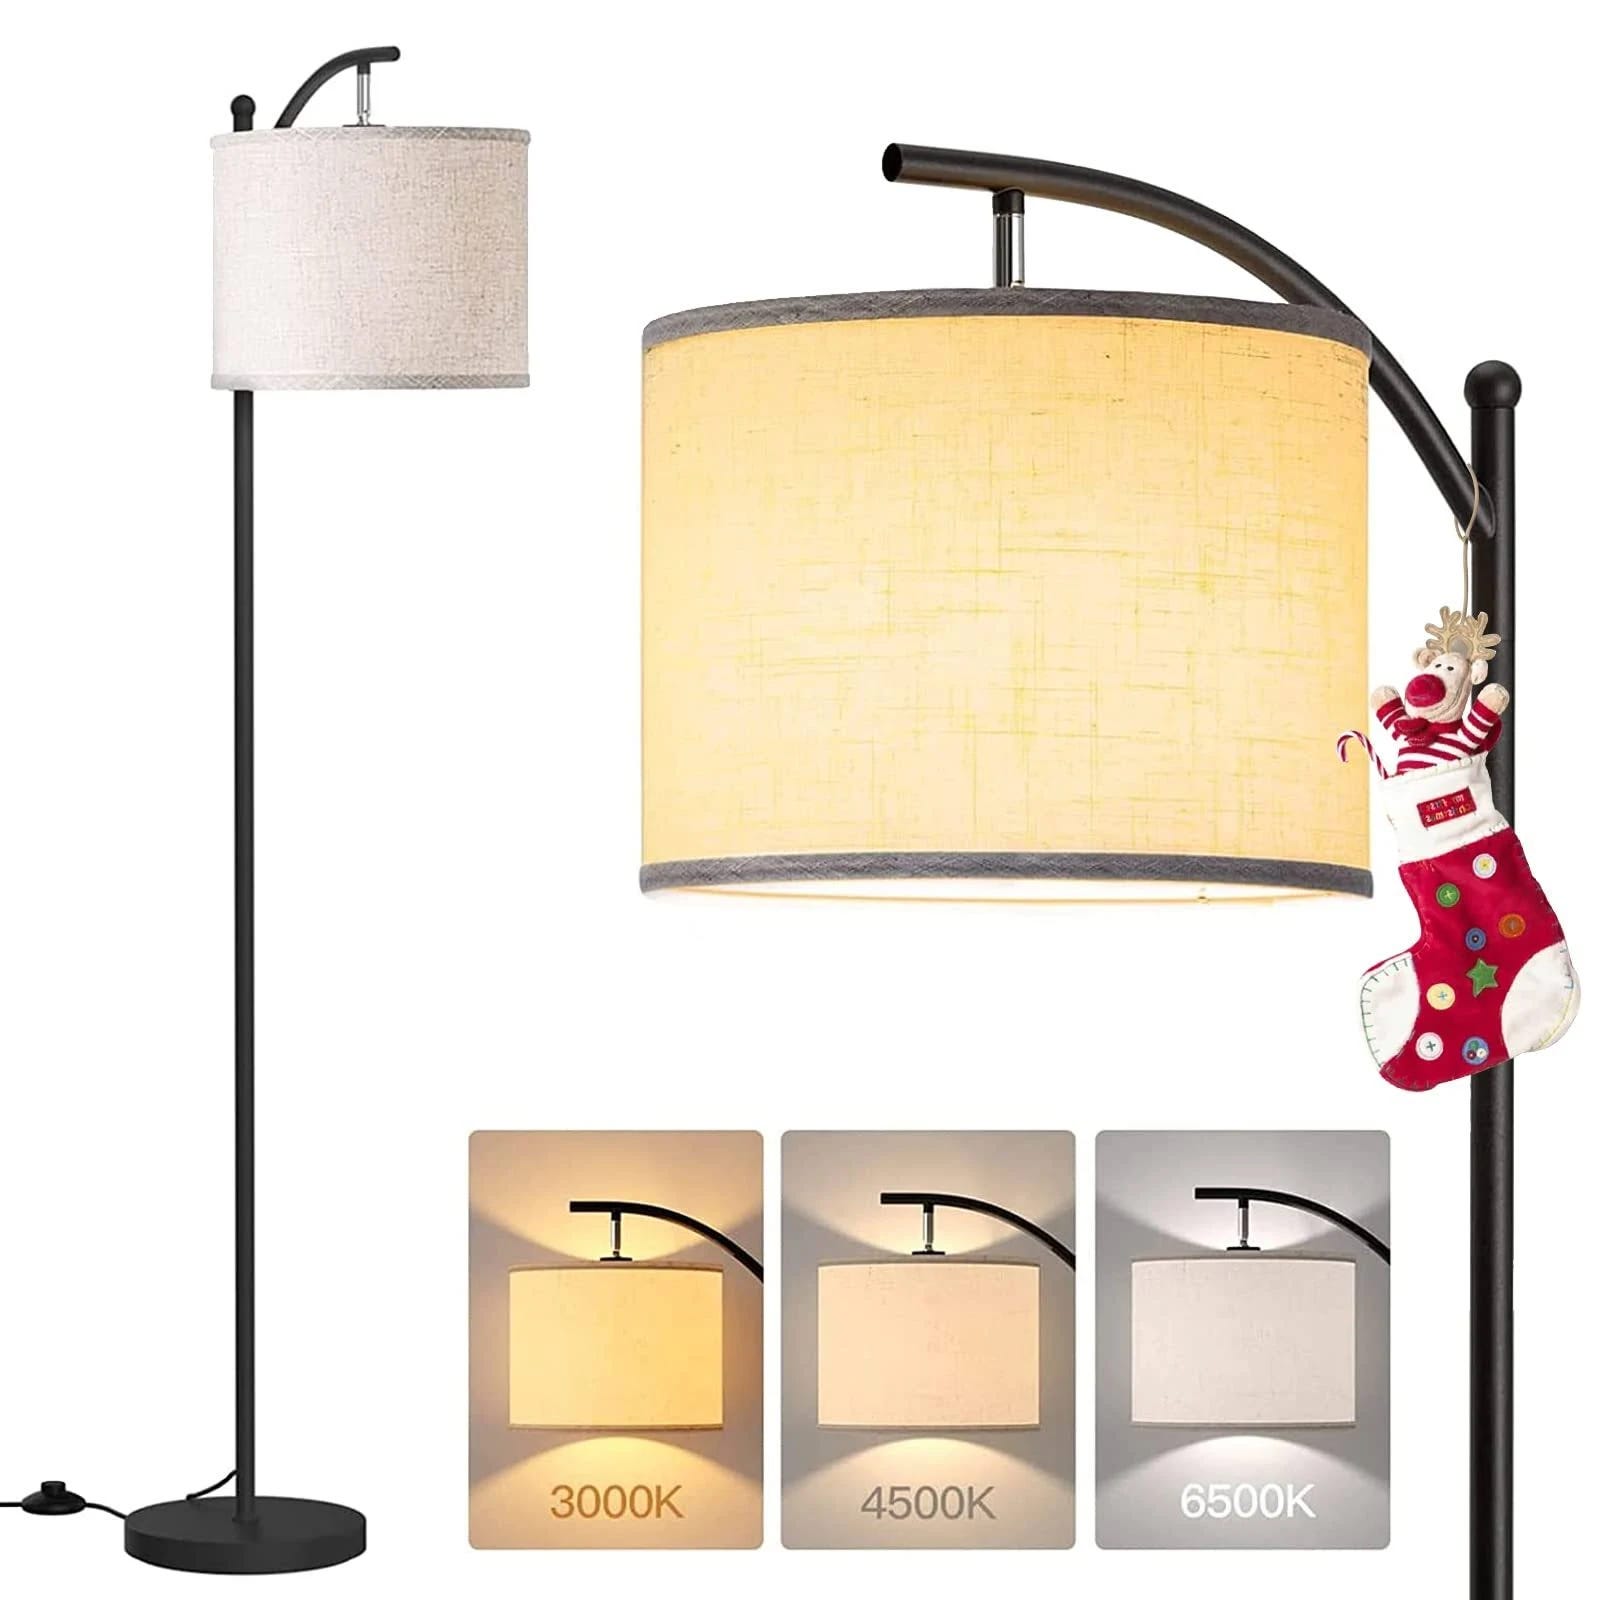 Stylish 3-Color LED Floor Lamp for Living Room or Bedroom | Image